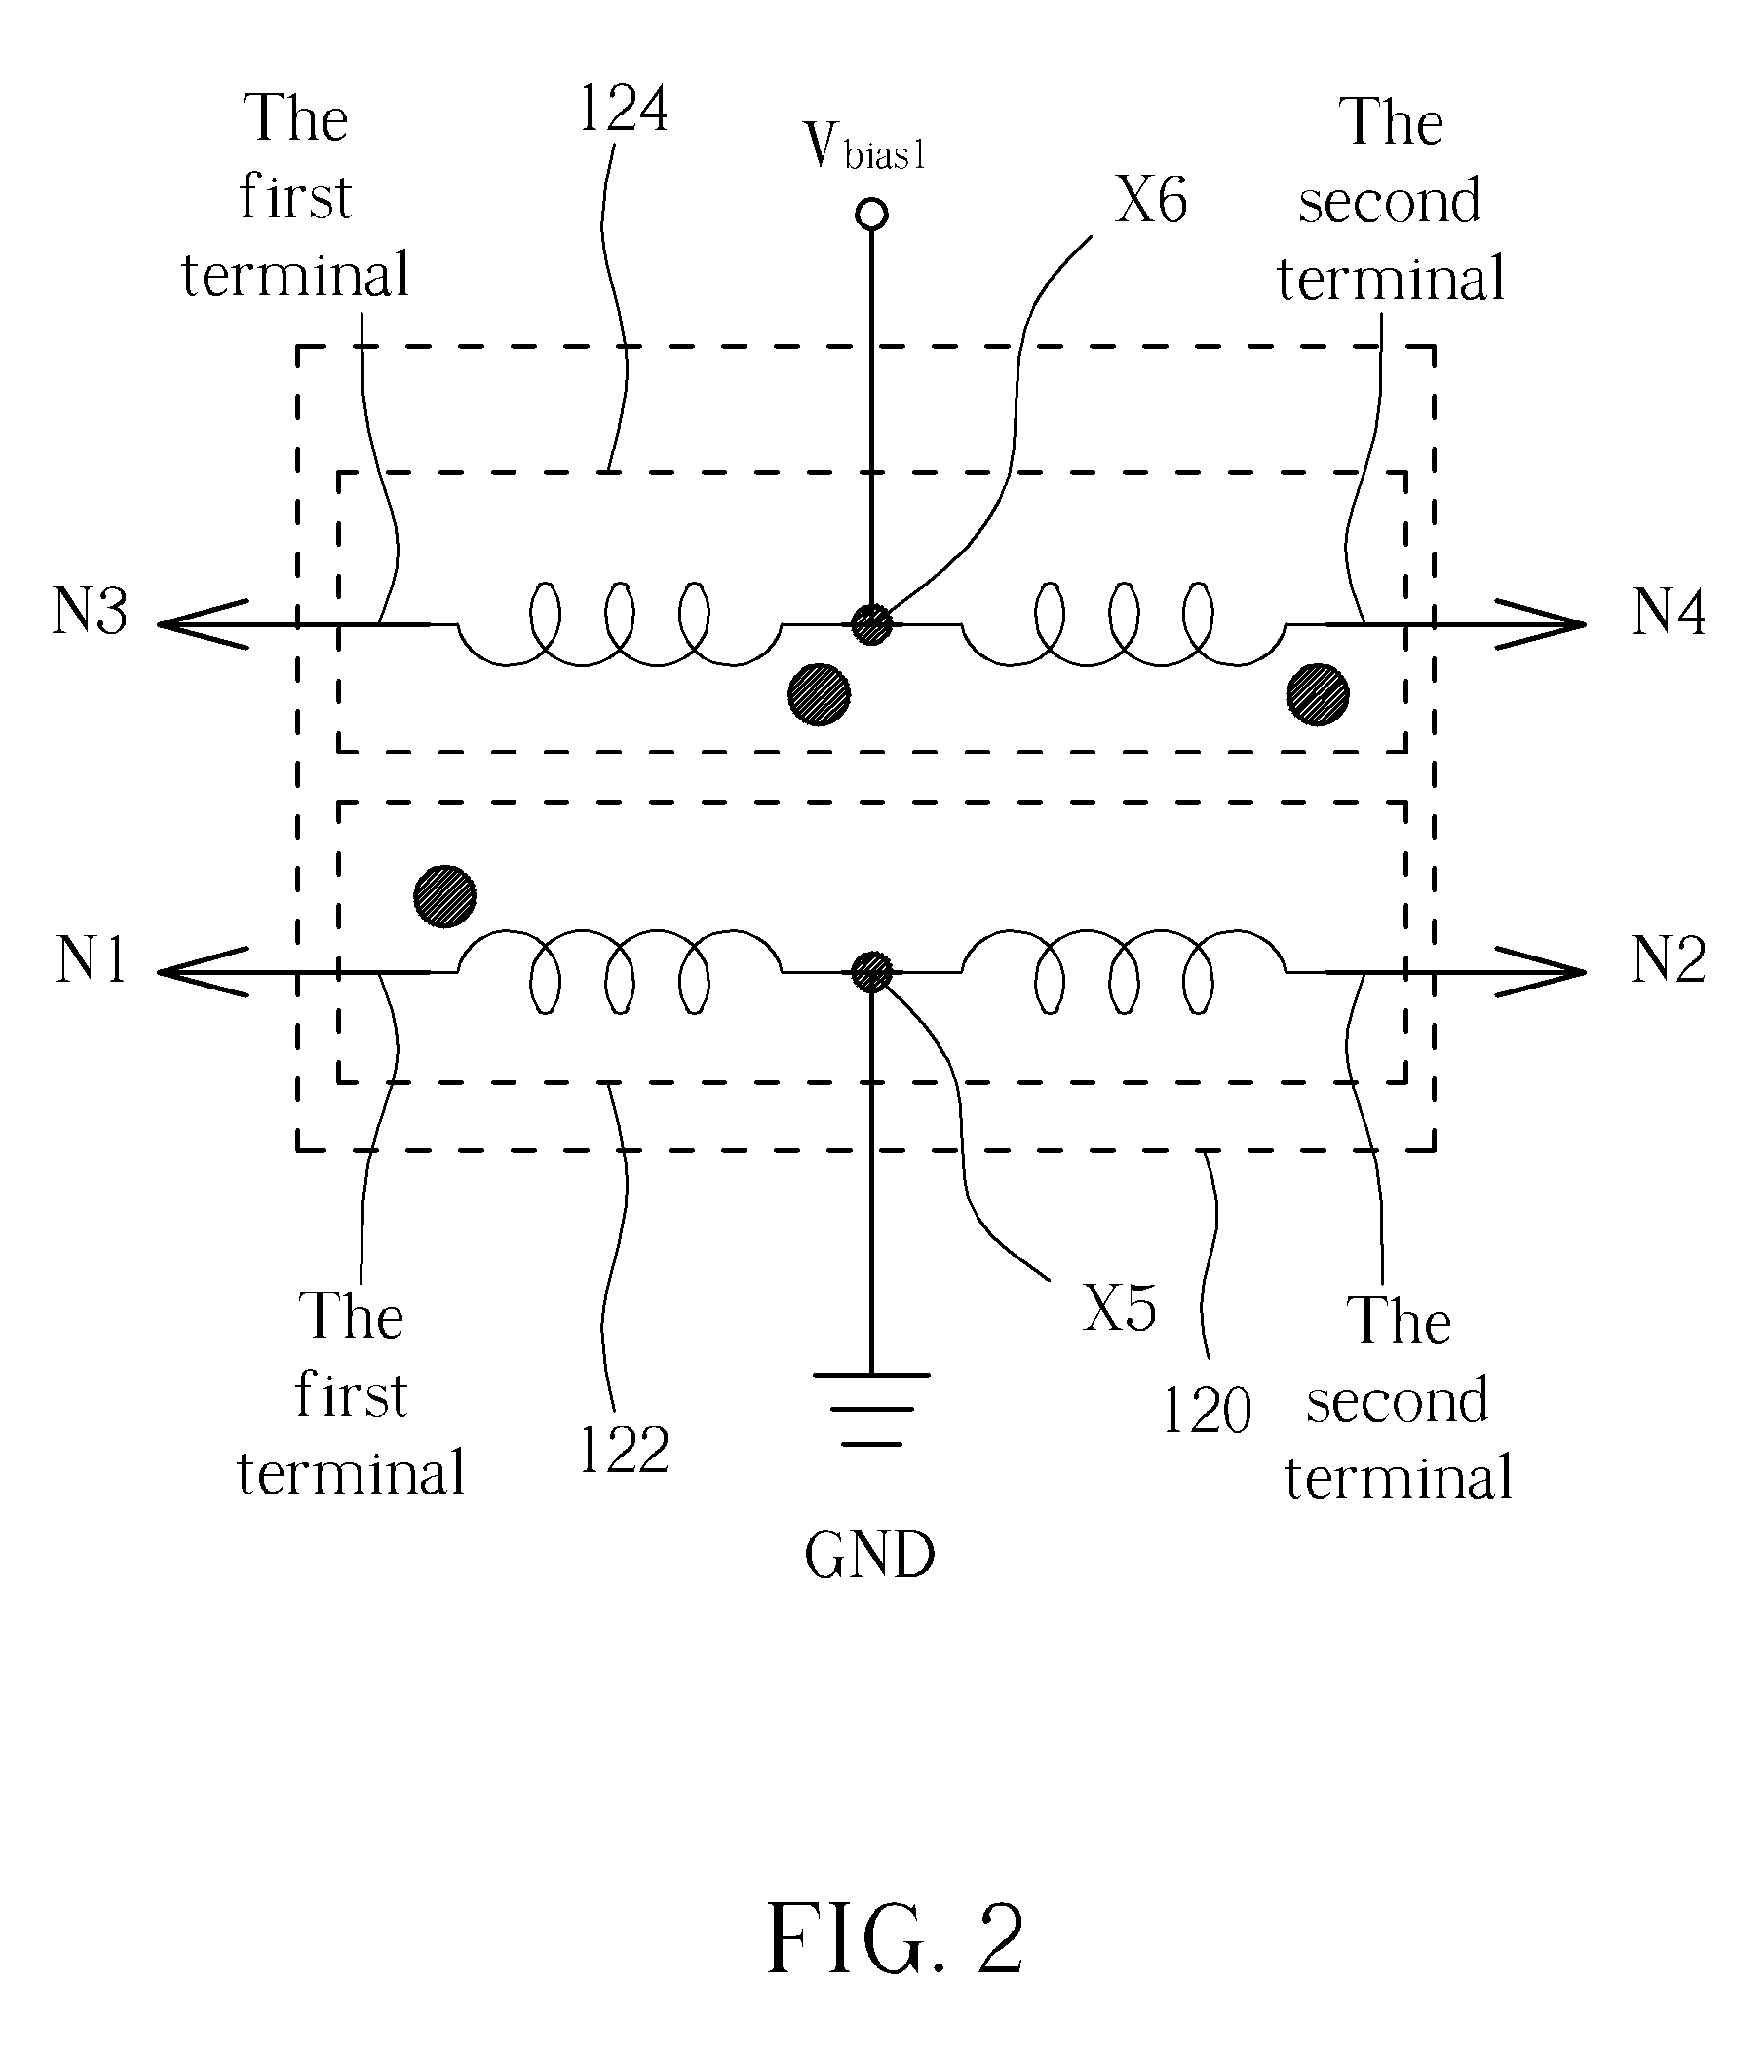 Amplifier with gain circuit coupeld to primary coil of transformer